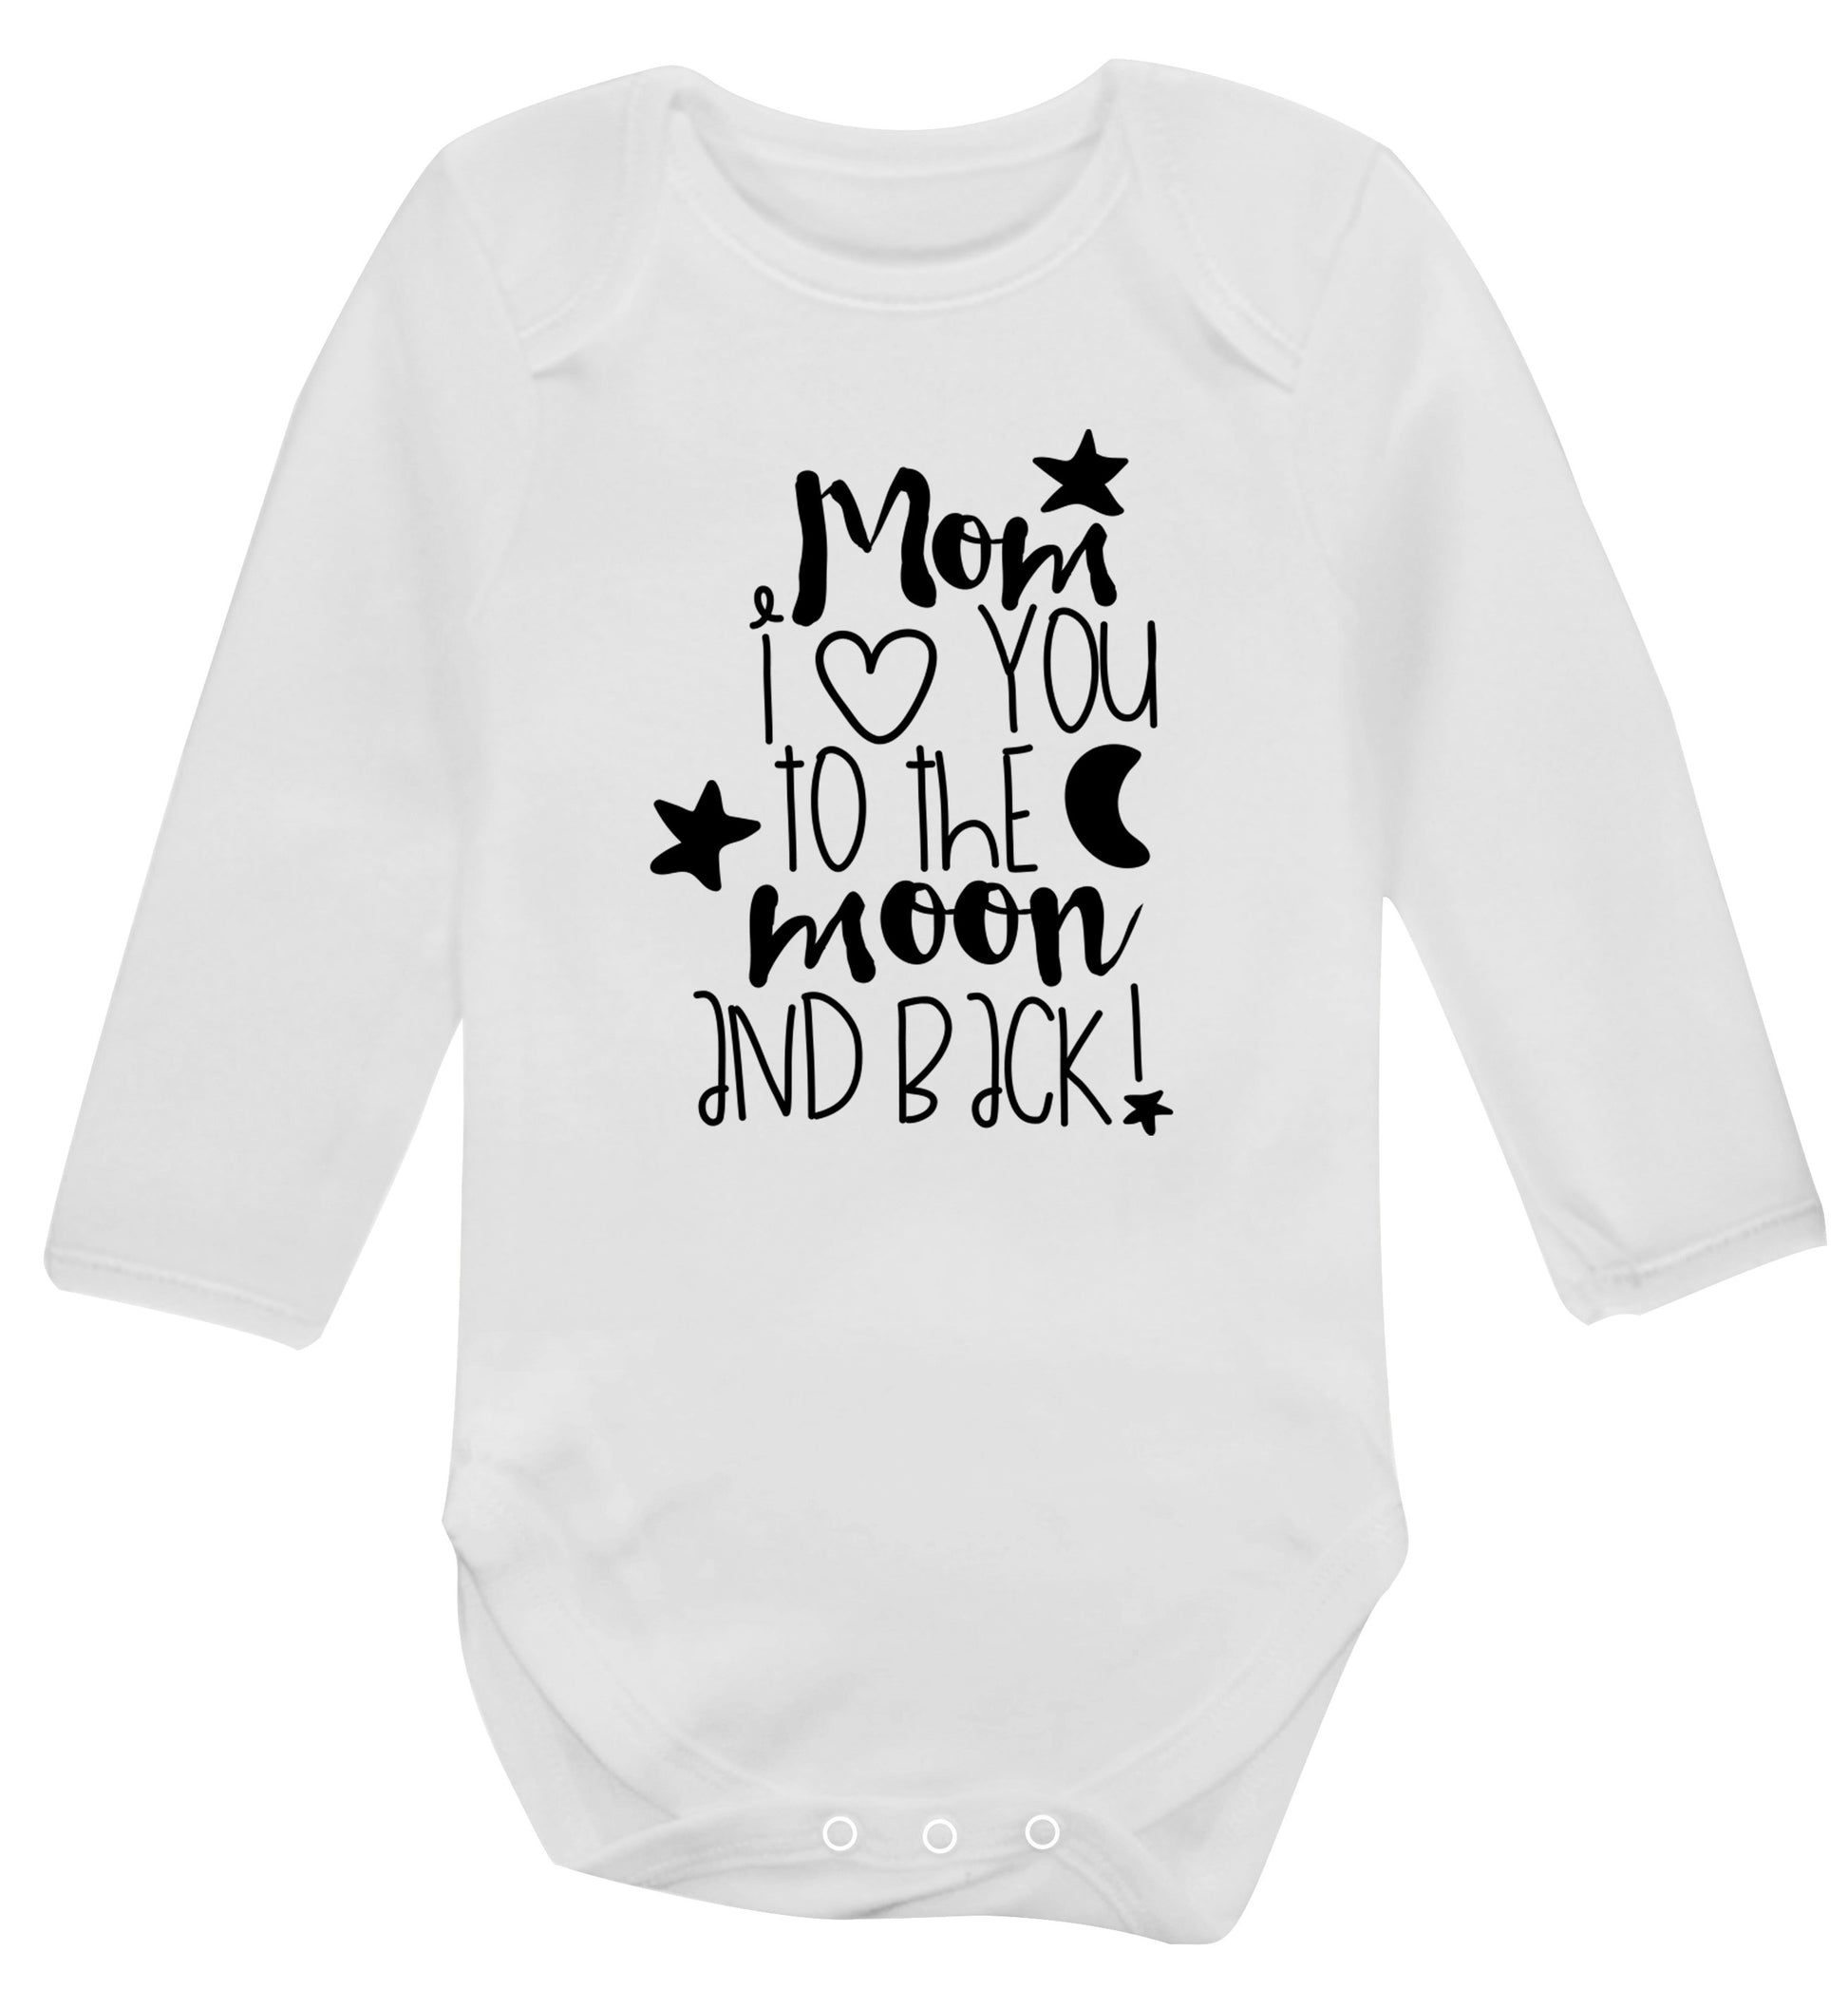 Dad I love you to the moon and back Baby Vest long sleeved white 6-12 months